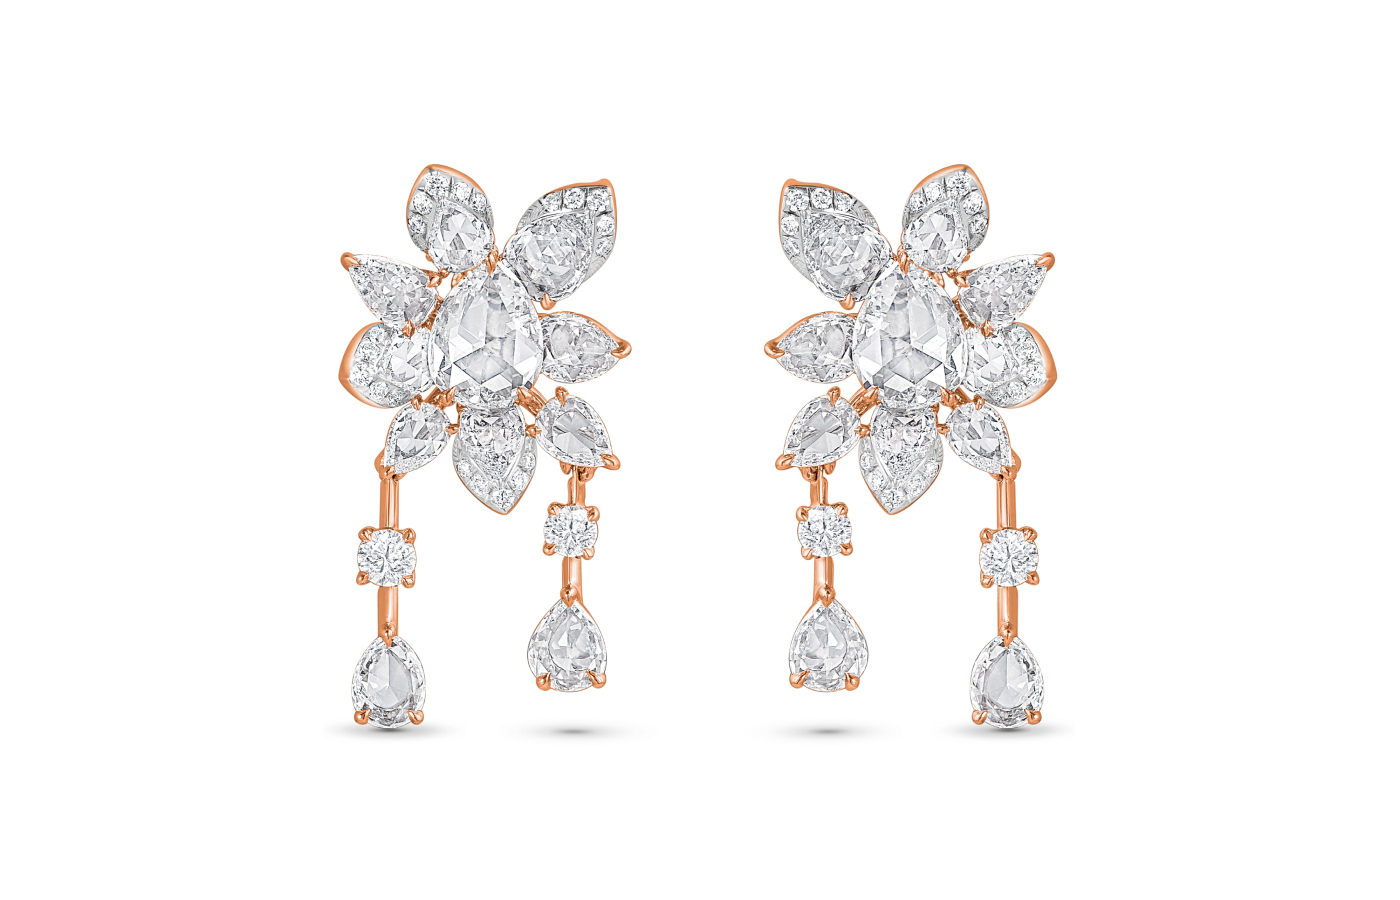 HARAKH Cascade cluster earrings with brilliant and rose-cut diamonds in 18k rose gold